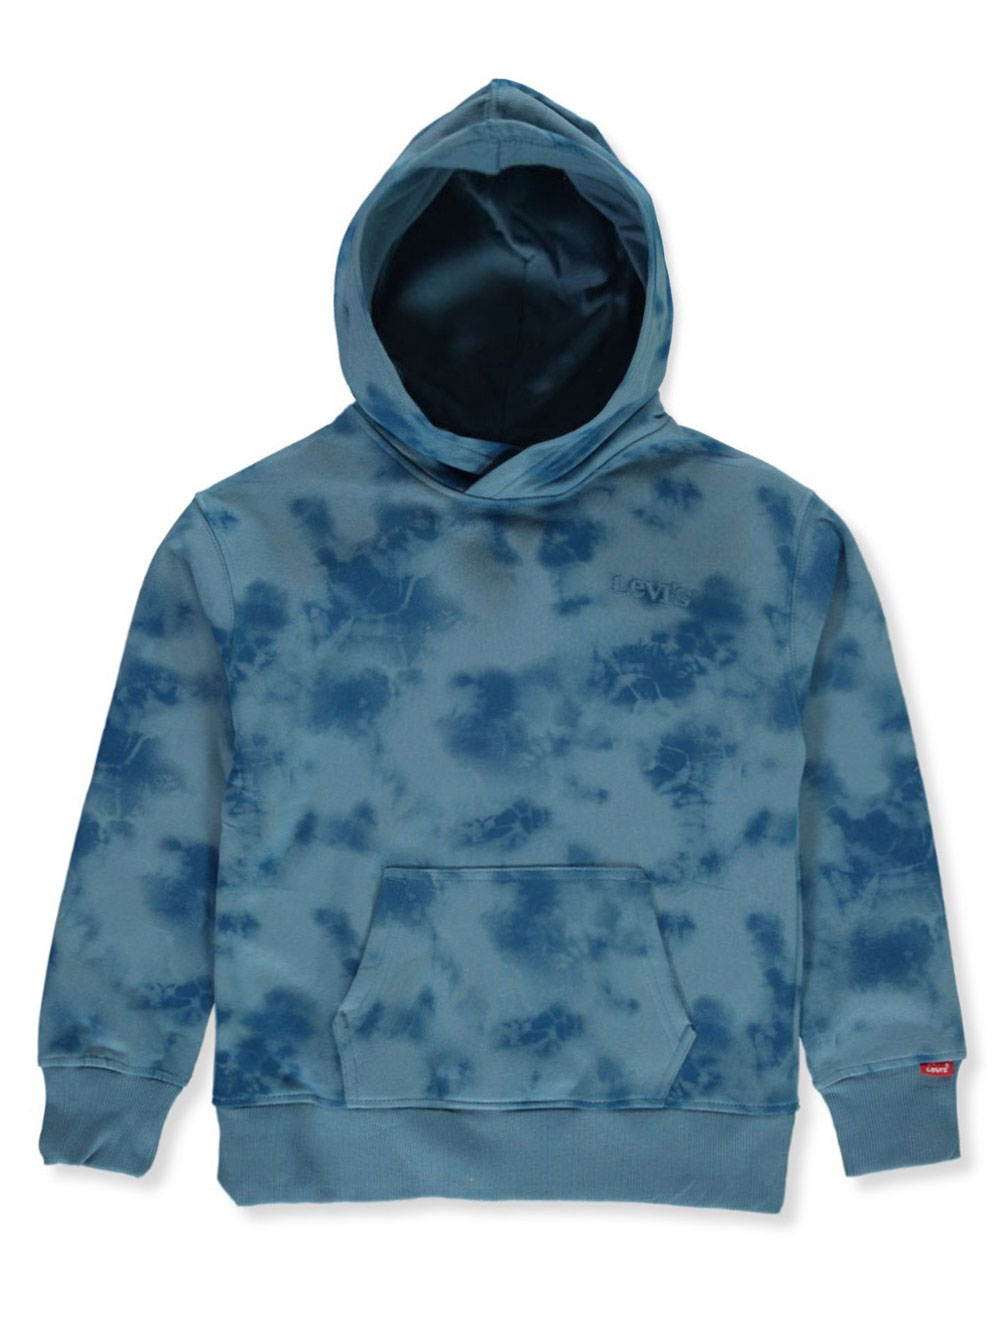 Navy and Multicolor Hoodies